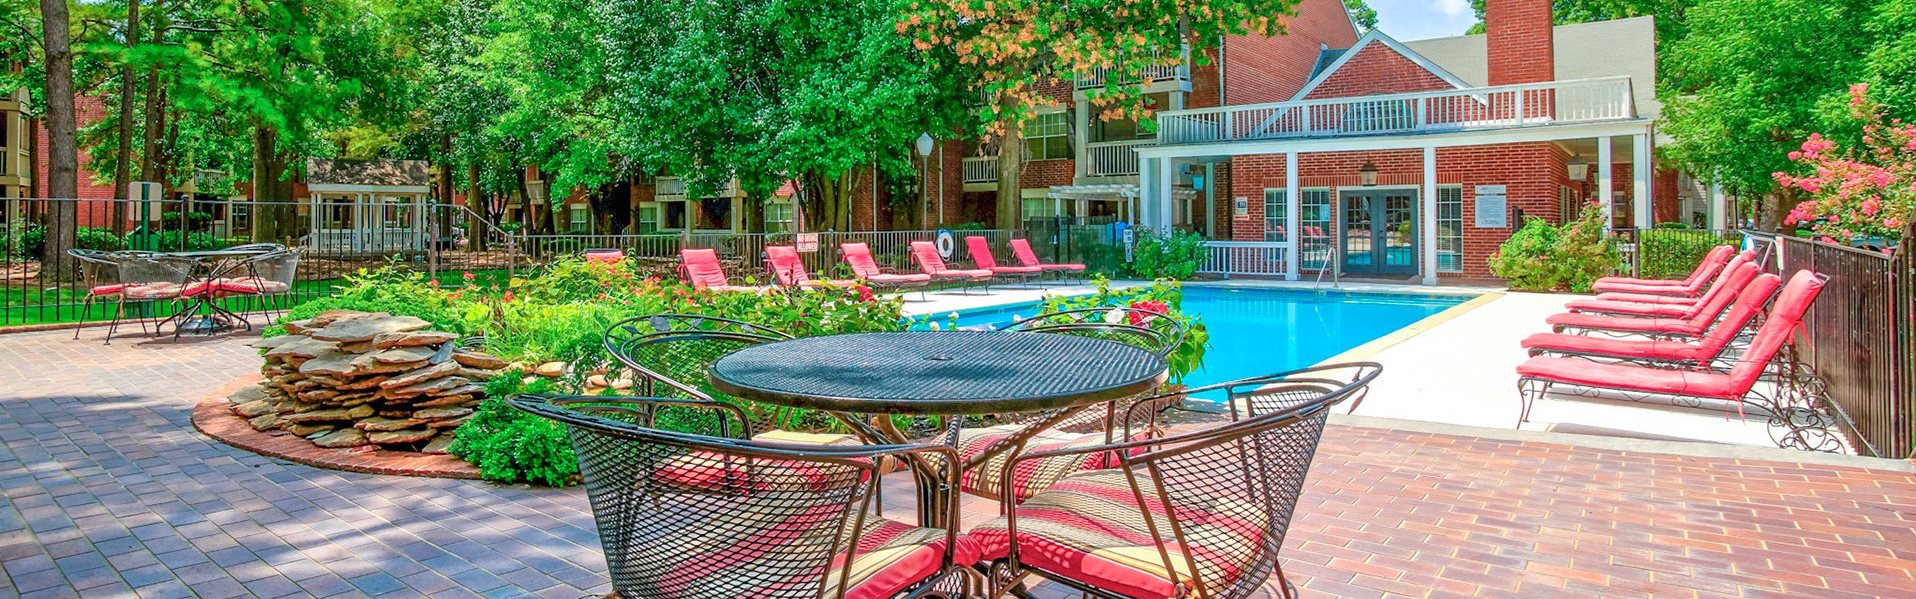 Greenbriar Apartments in Tulsa Oklahoma has a sparkling pool with lounge chairs surrounding it. Now renting 1 and 2 bedrooms!